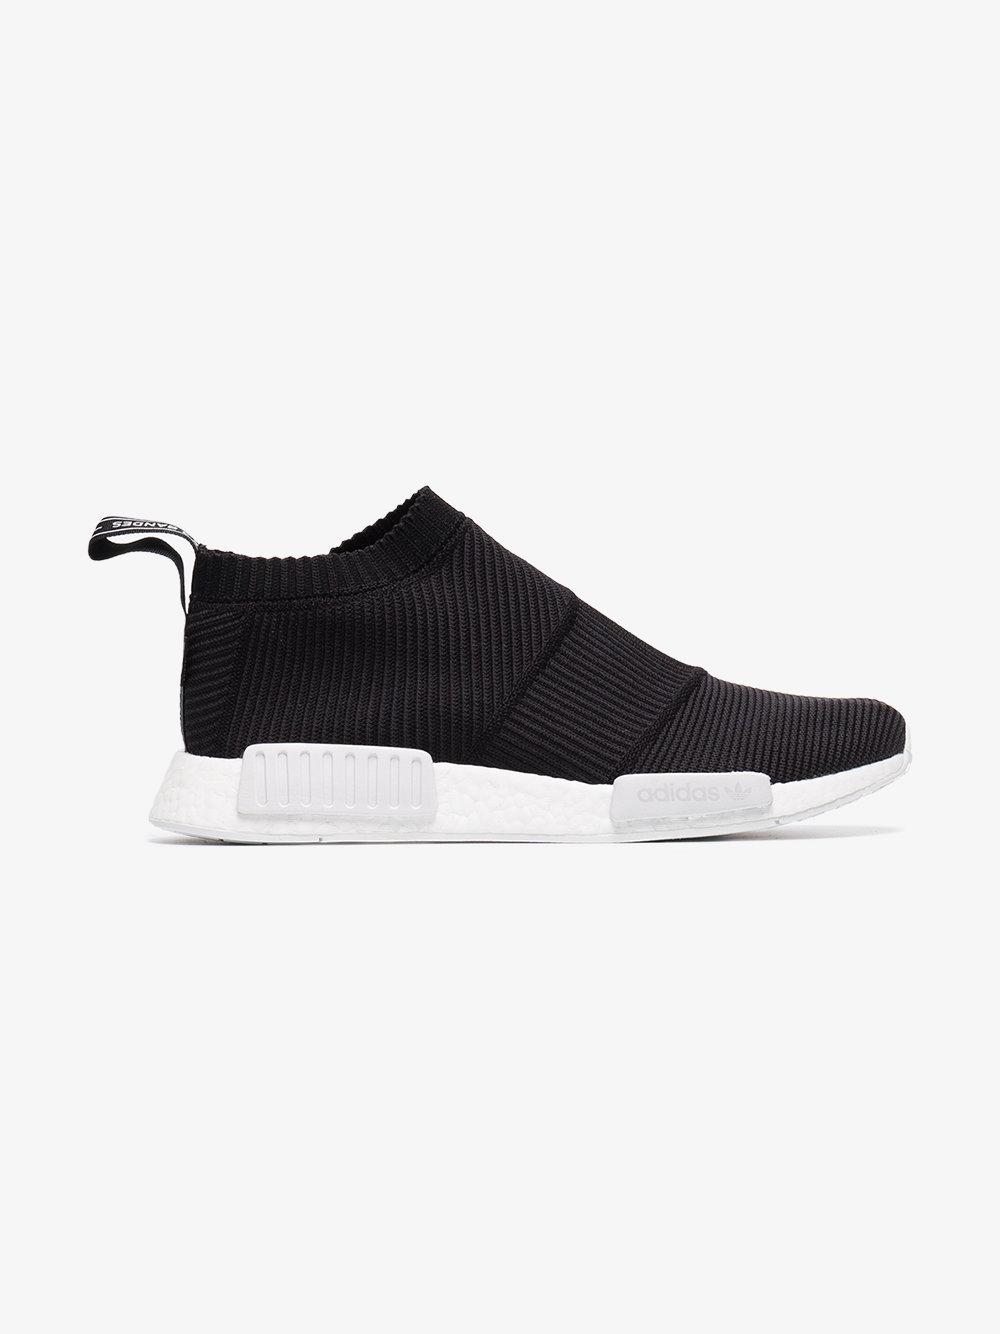 adidas Nmd in Black for Lyst